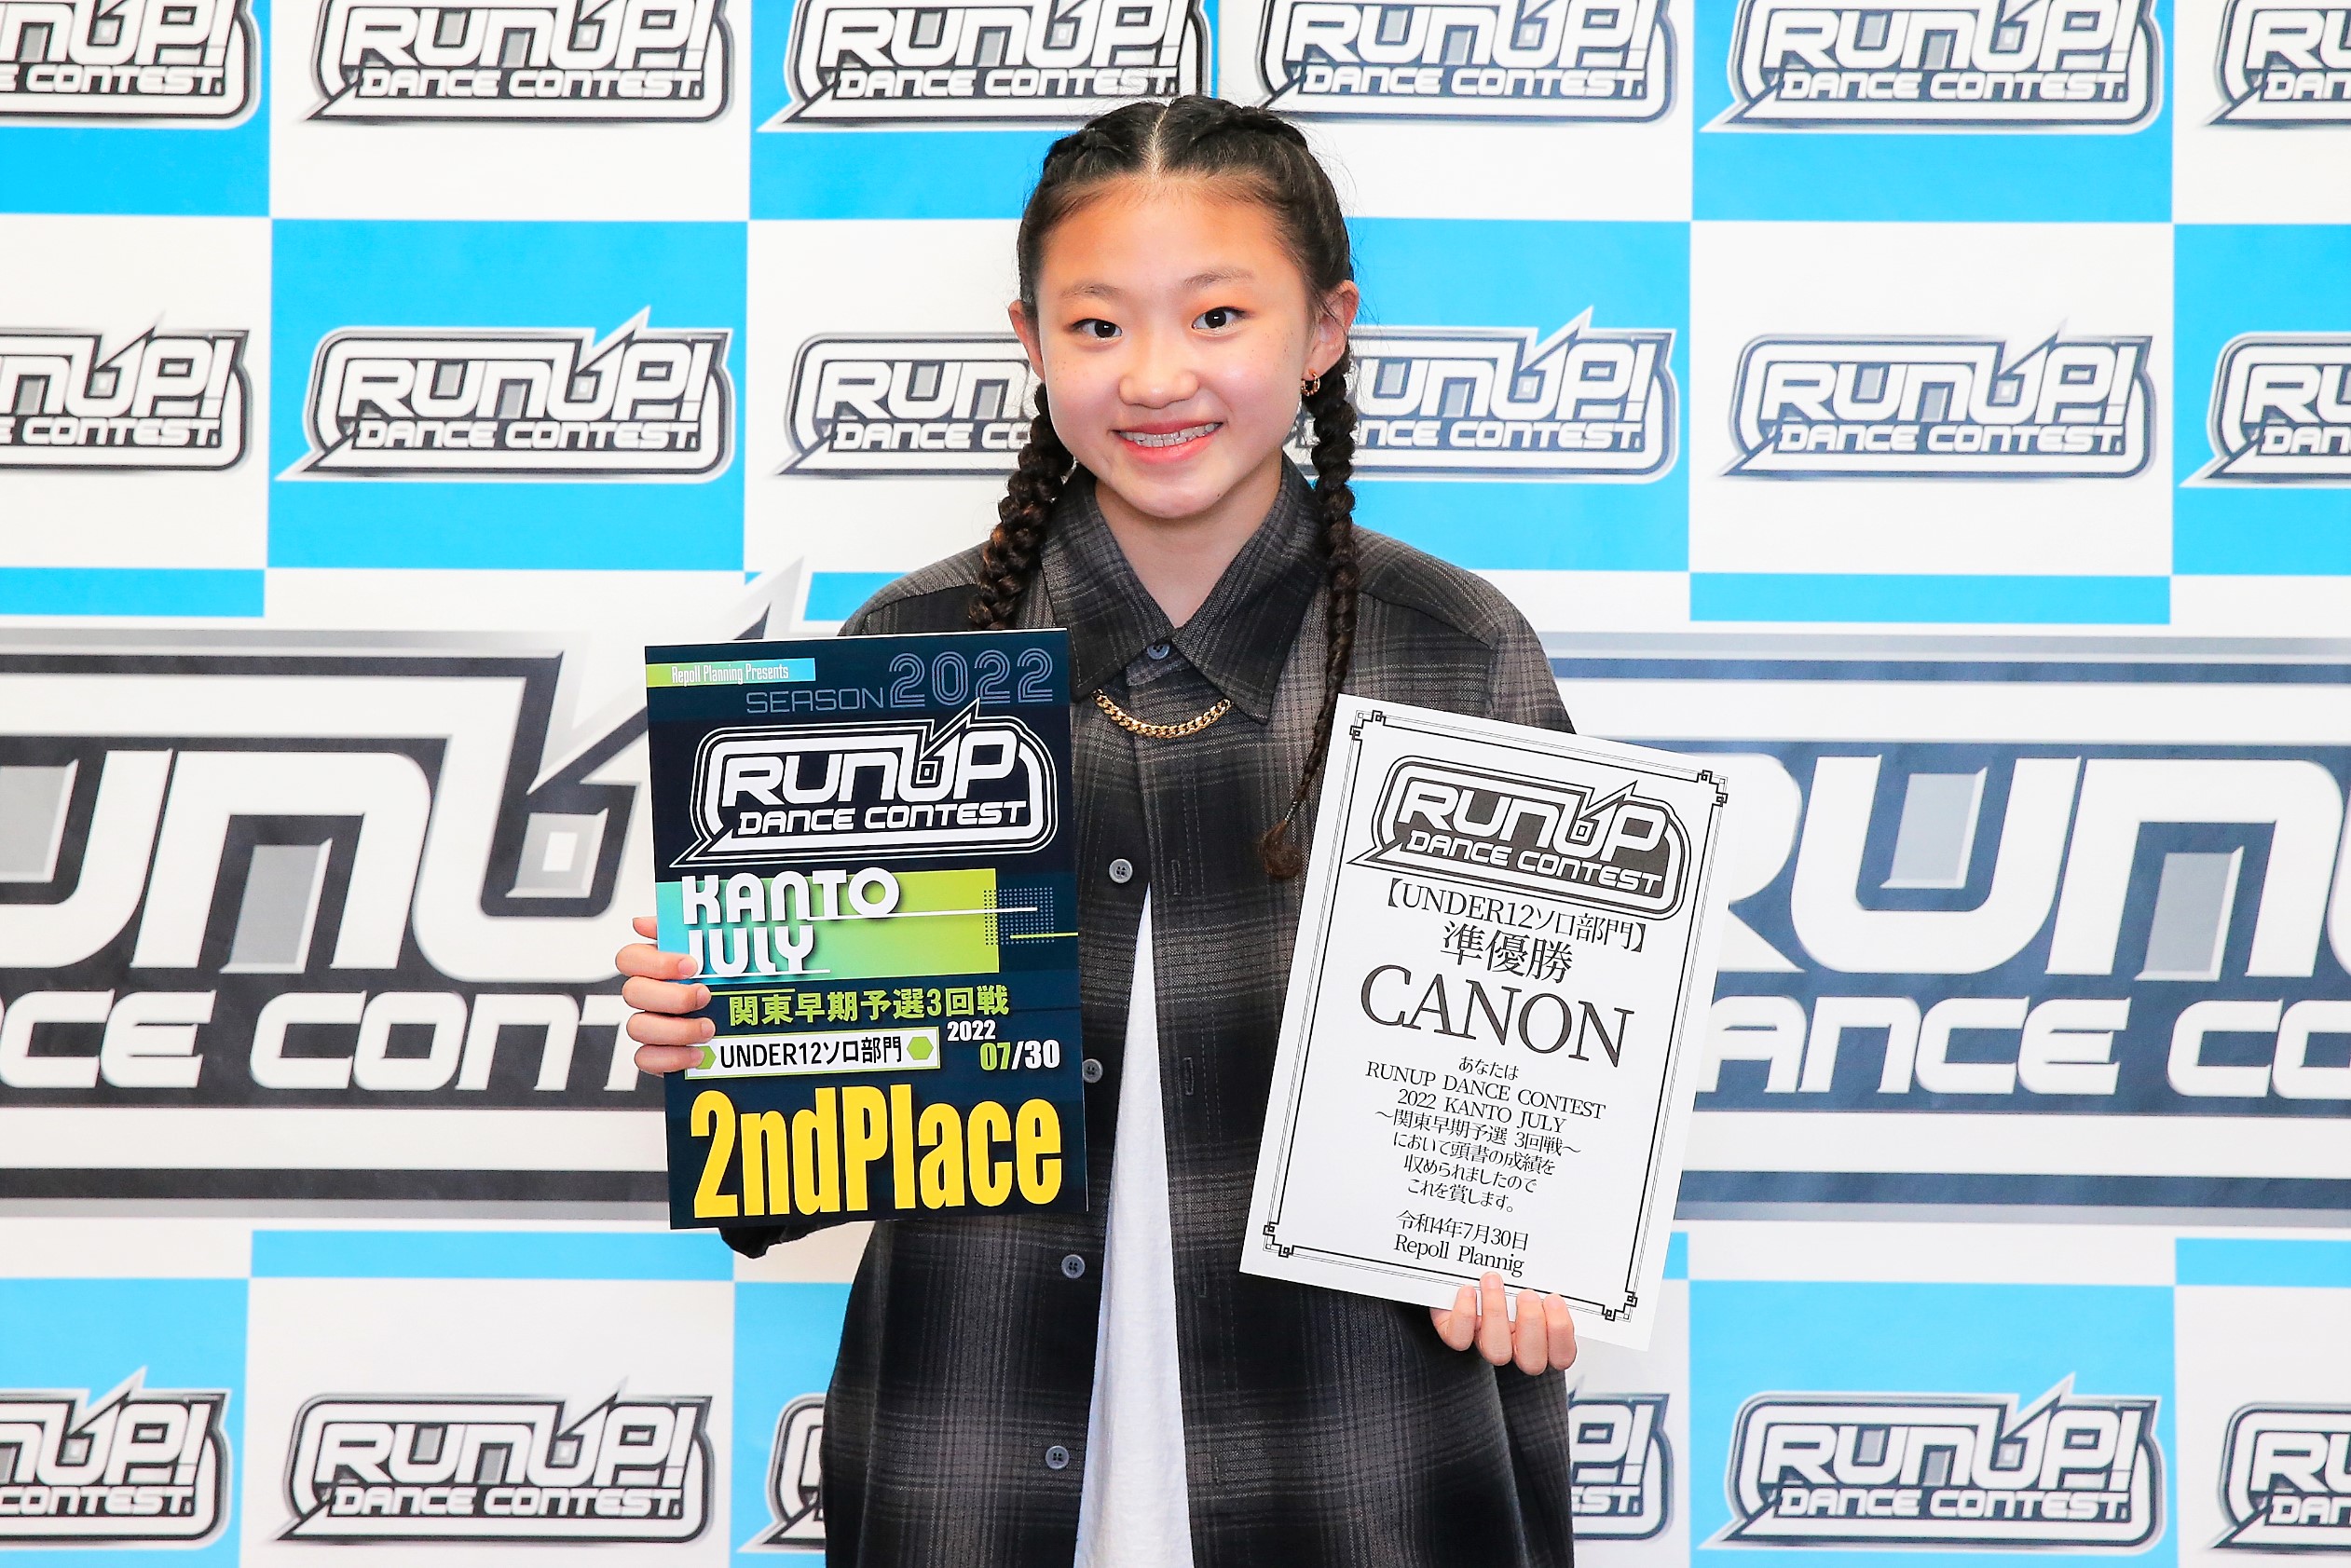 RUNUP 2022 KANTO JULY UNDER12ソロ 準優勝 CANON